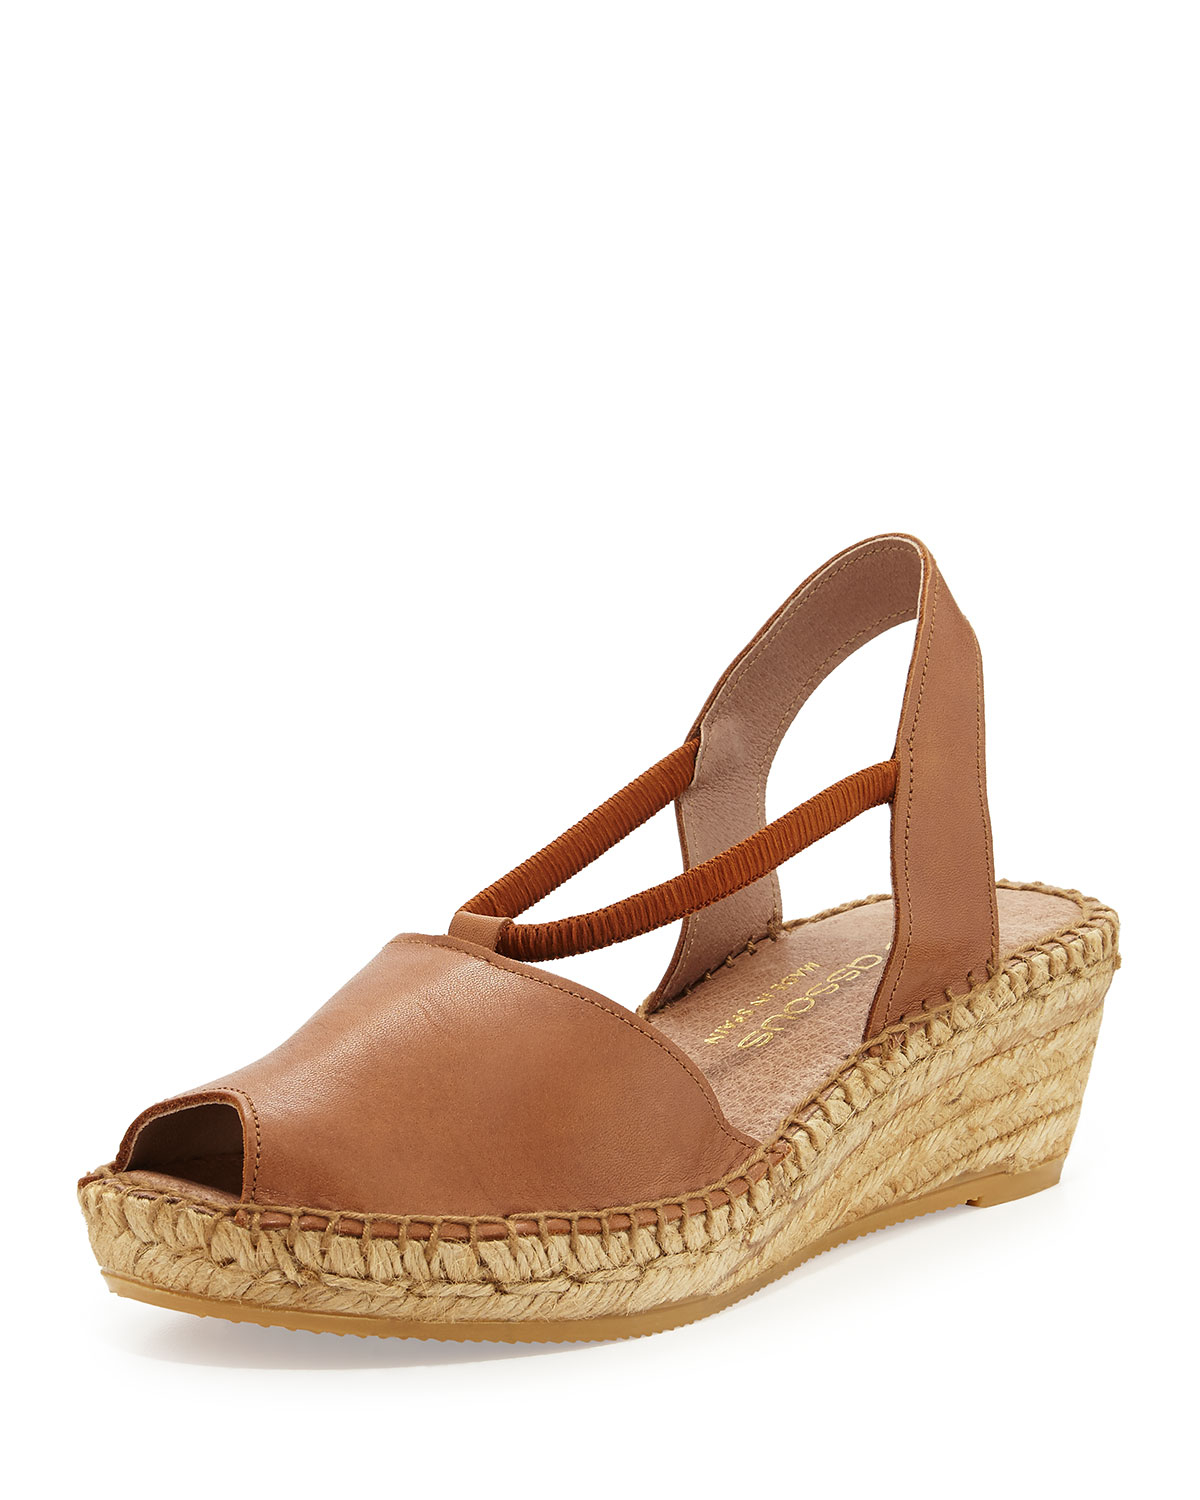 Andre assous Dainty Leather Slip-On Espadrille Wedge in Brown (CUOIO ...